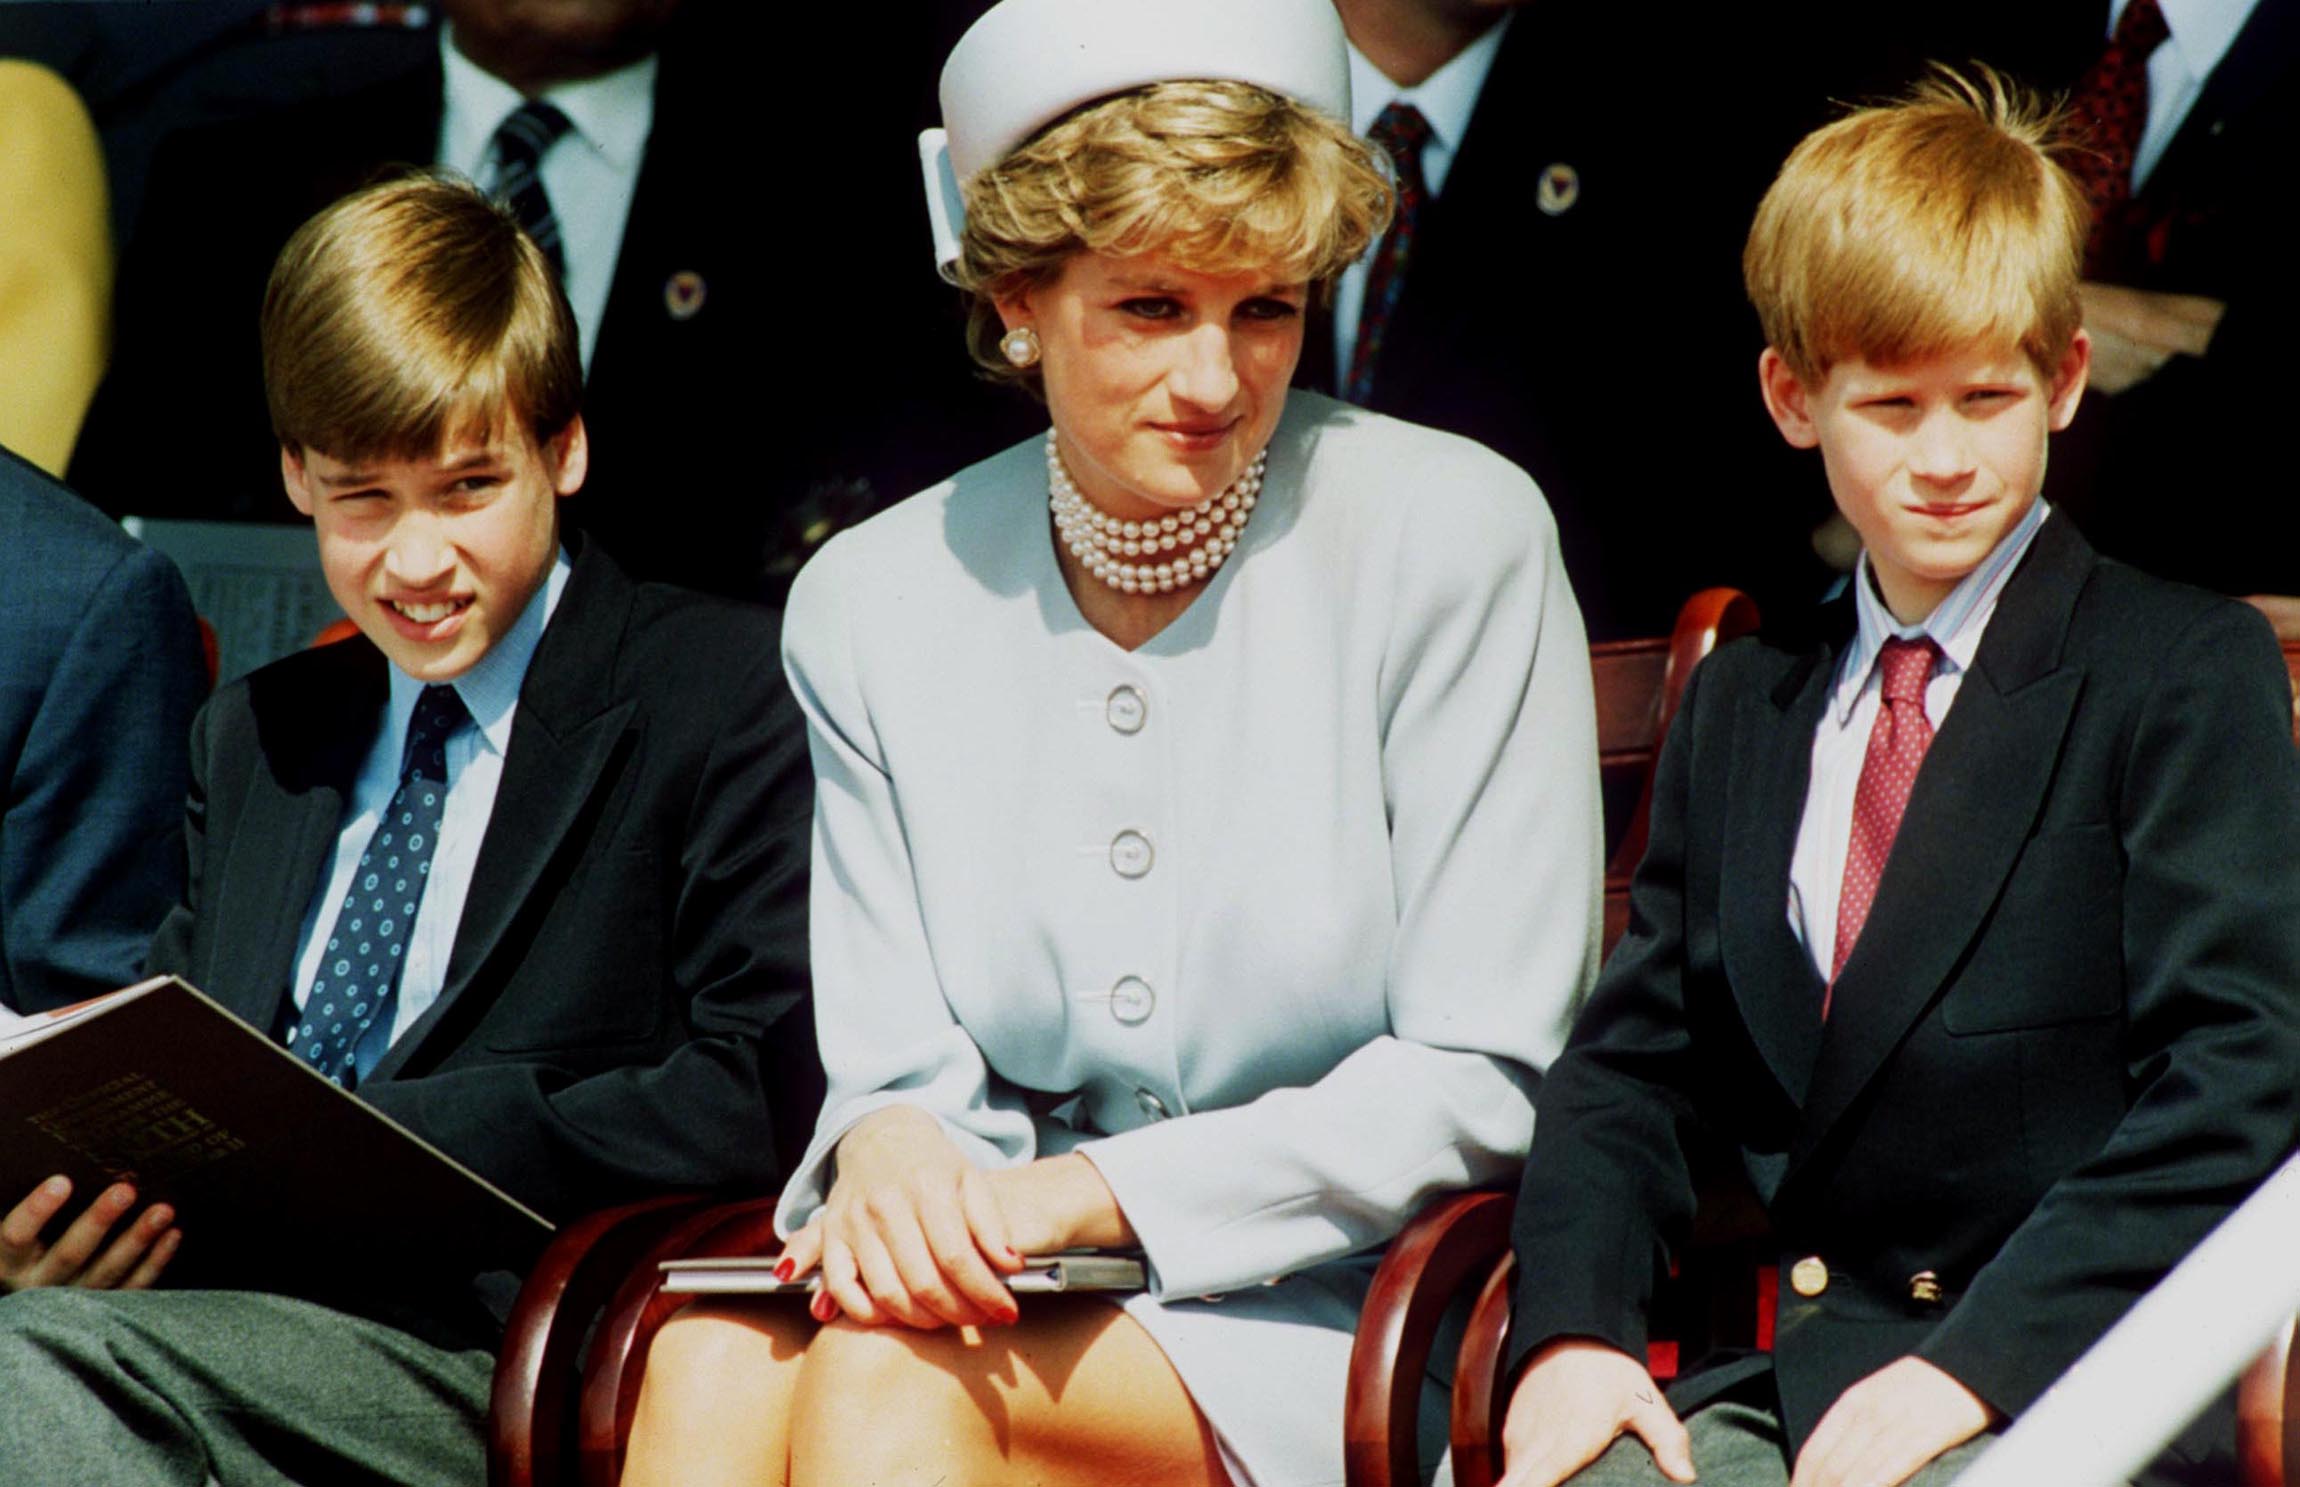 Princess Diana, Princess of Wales with her sons Prince William and Prince Harry attend the Heads of State VE Remembrance Service in Hyde Park on May 7, 1995 in London, England. | Source: Getty Images